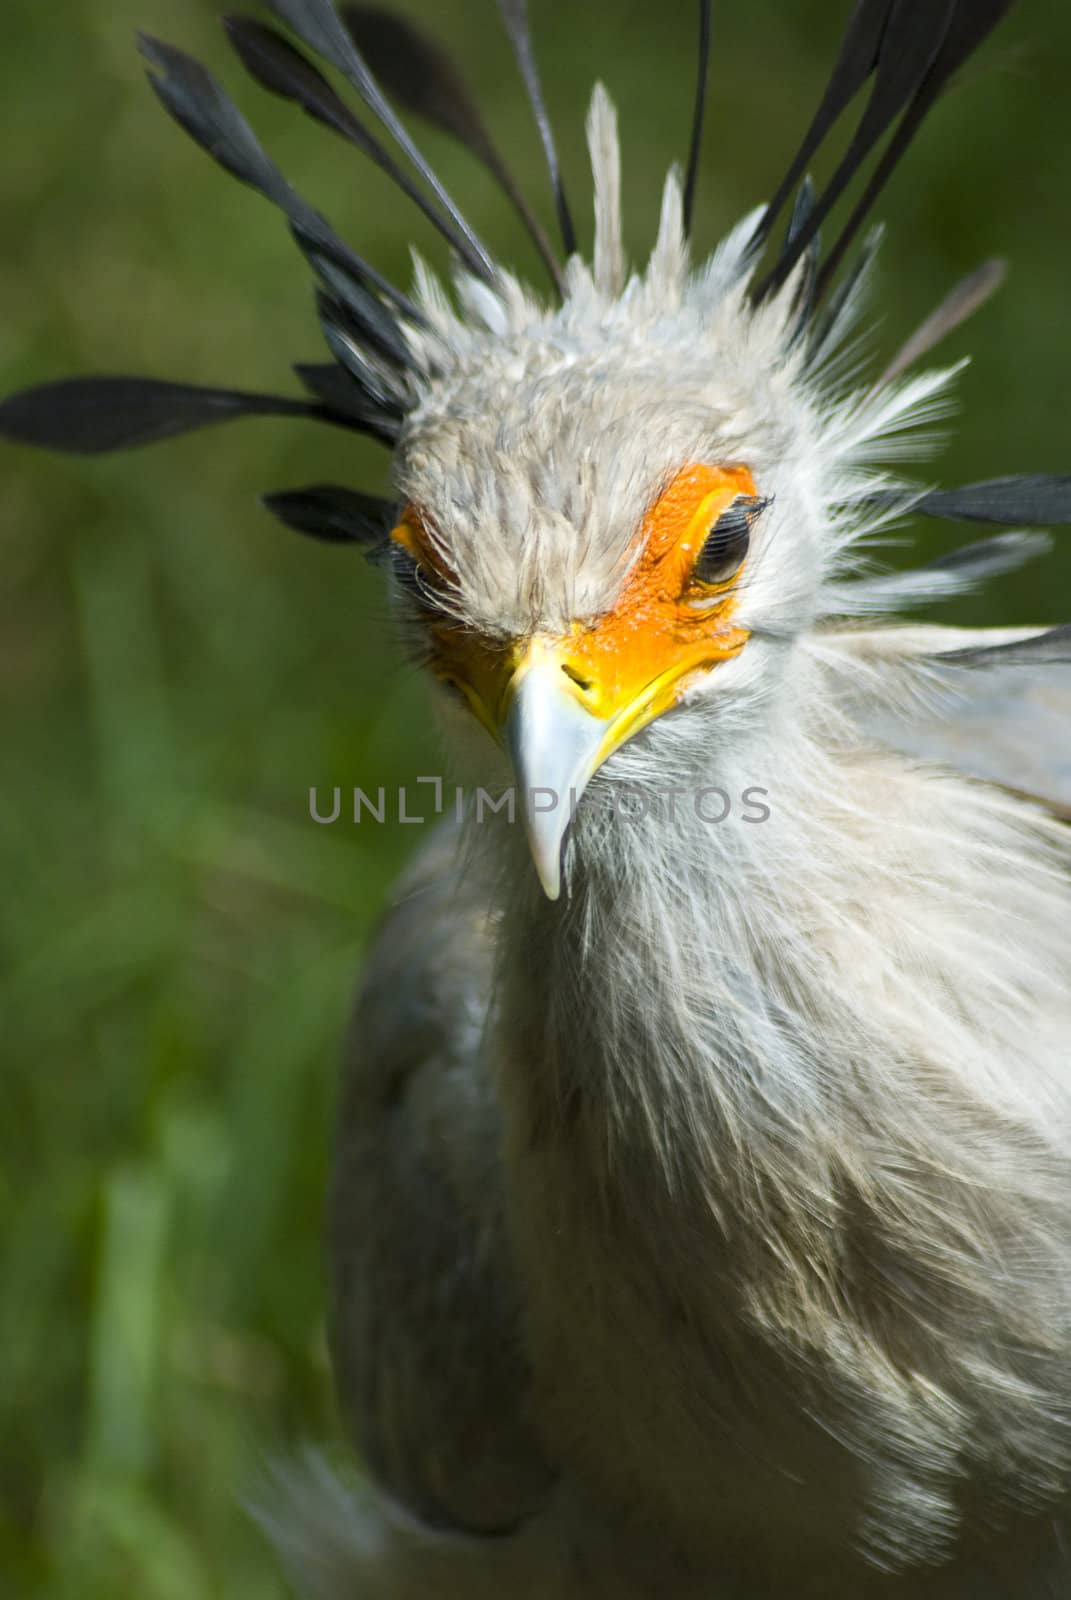 White bird with orange around its eyes and exotic feathers around its head